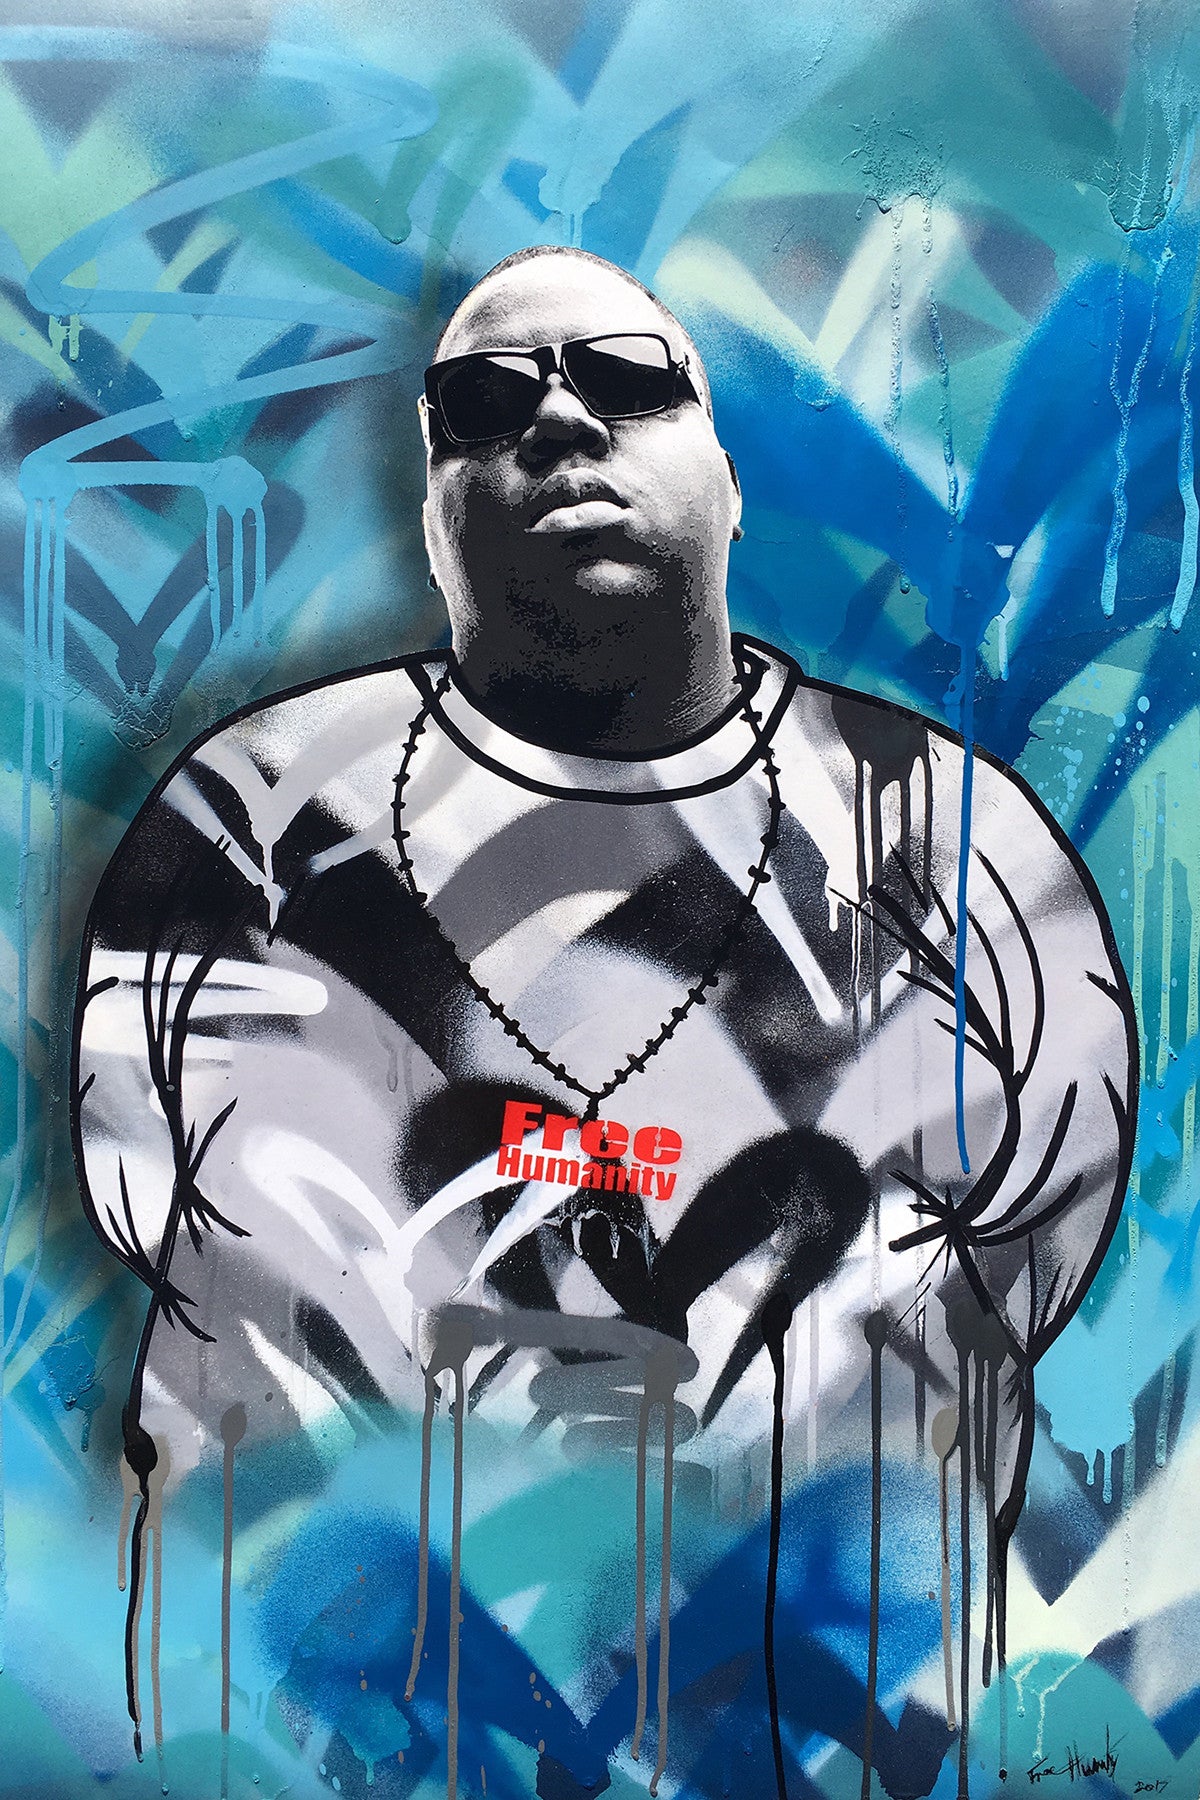 Free Humanity &quot;Notorious B.I.G.&quot; - Hand-Embellished Print - 24 X 36&quot;